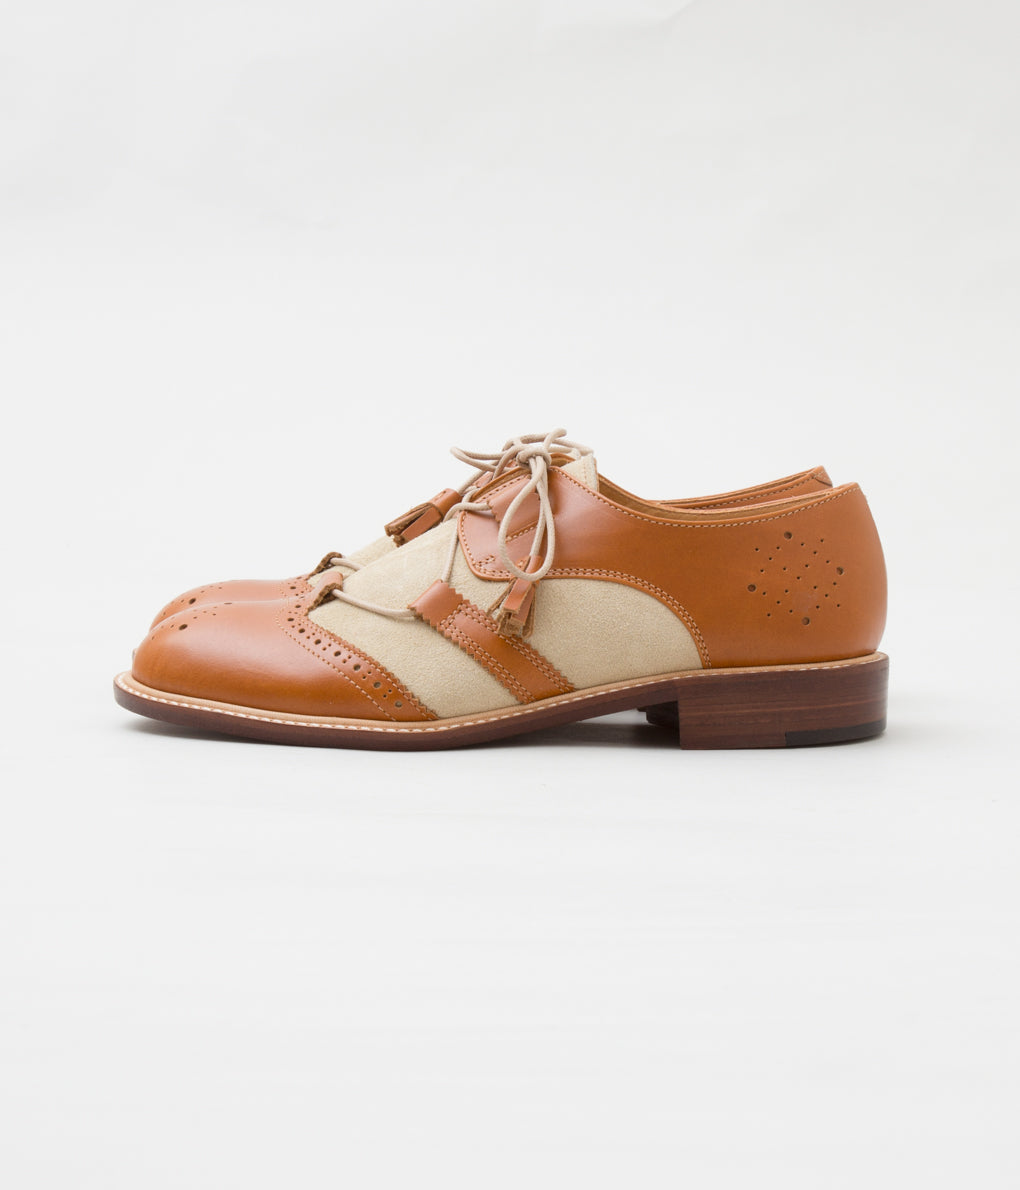 THE OLD CURIOSITY SHOP "#13843 CLASSIC GILLIE SHOES"(BROWN)